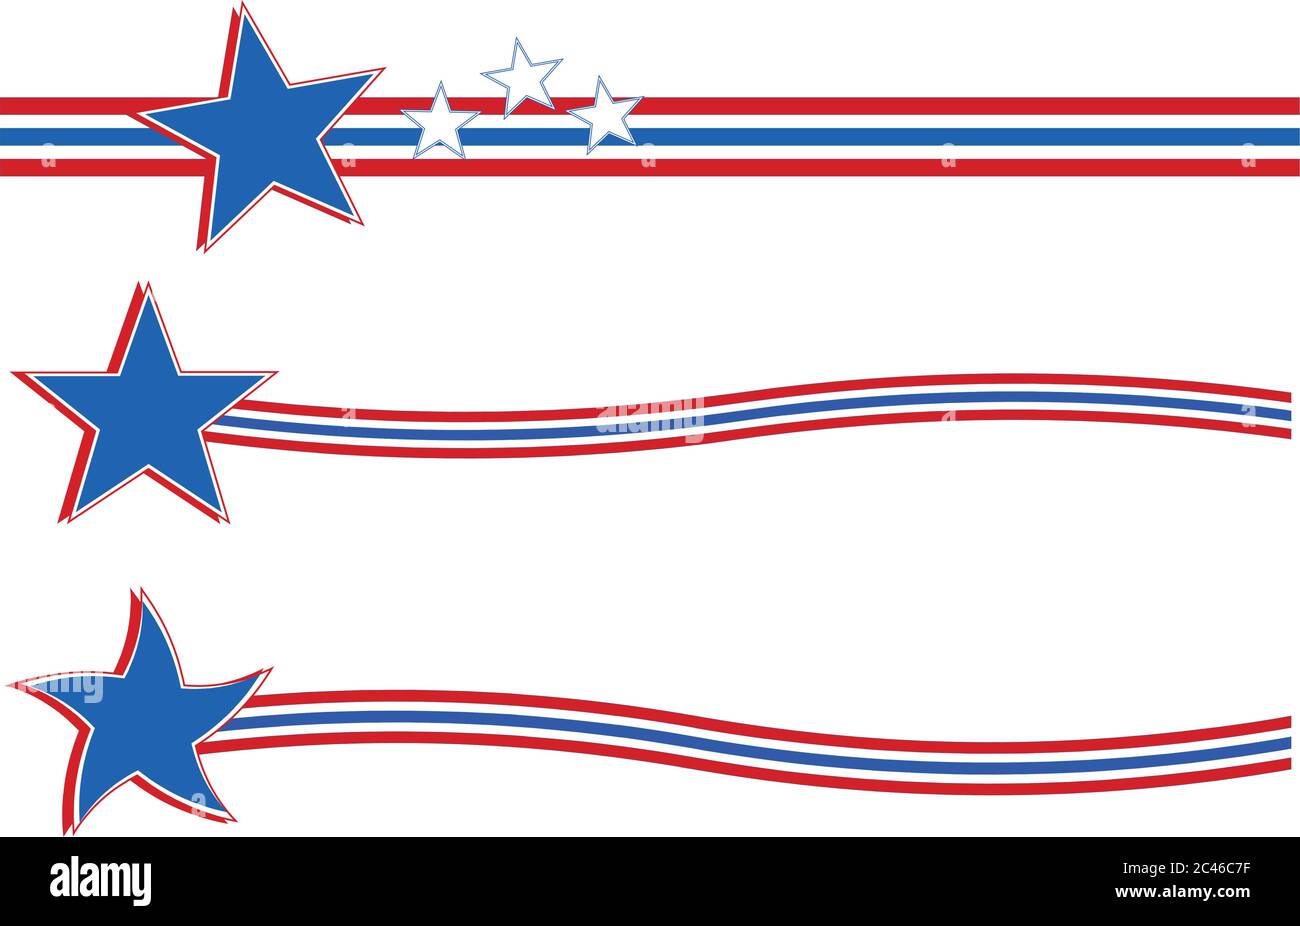 The Meaning Of The Stars And Stripes High-Res Vector Graphic - Getty Images